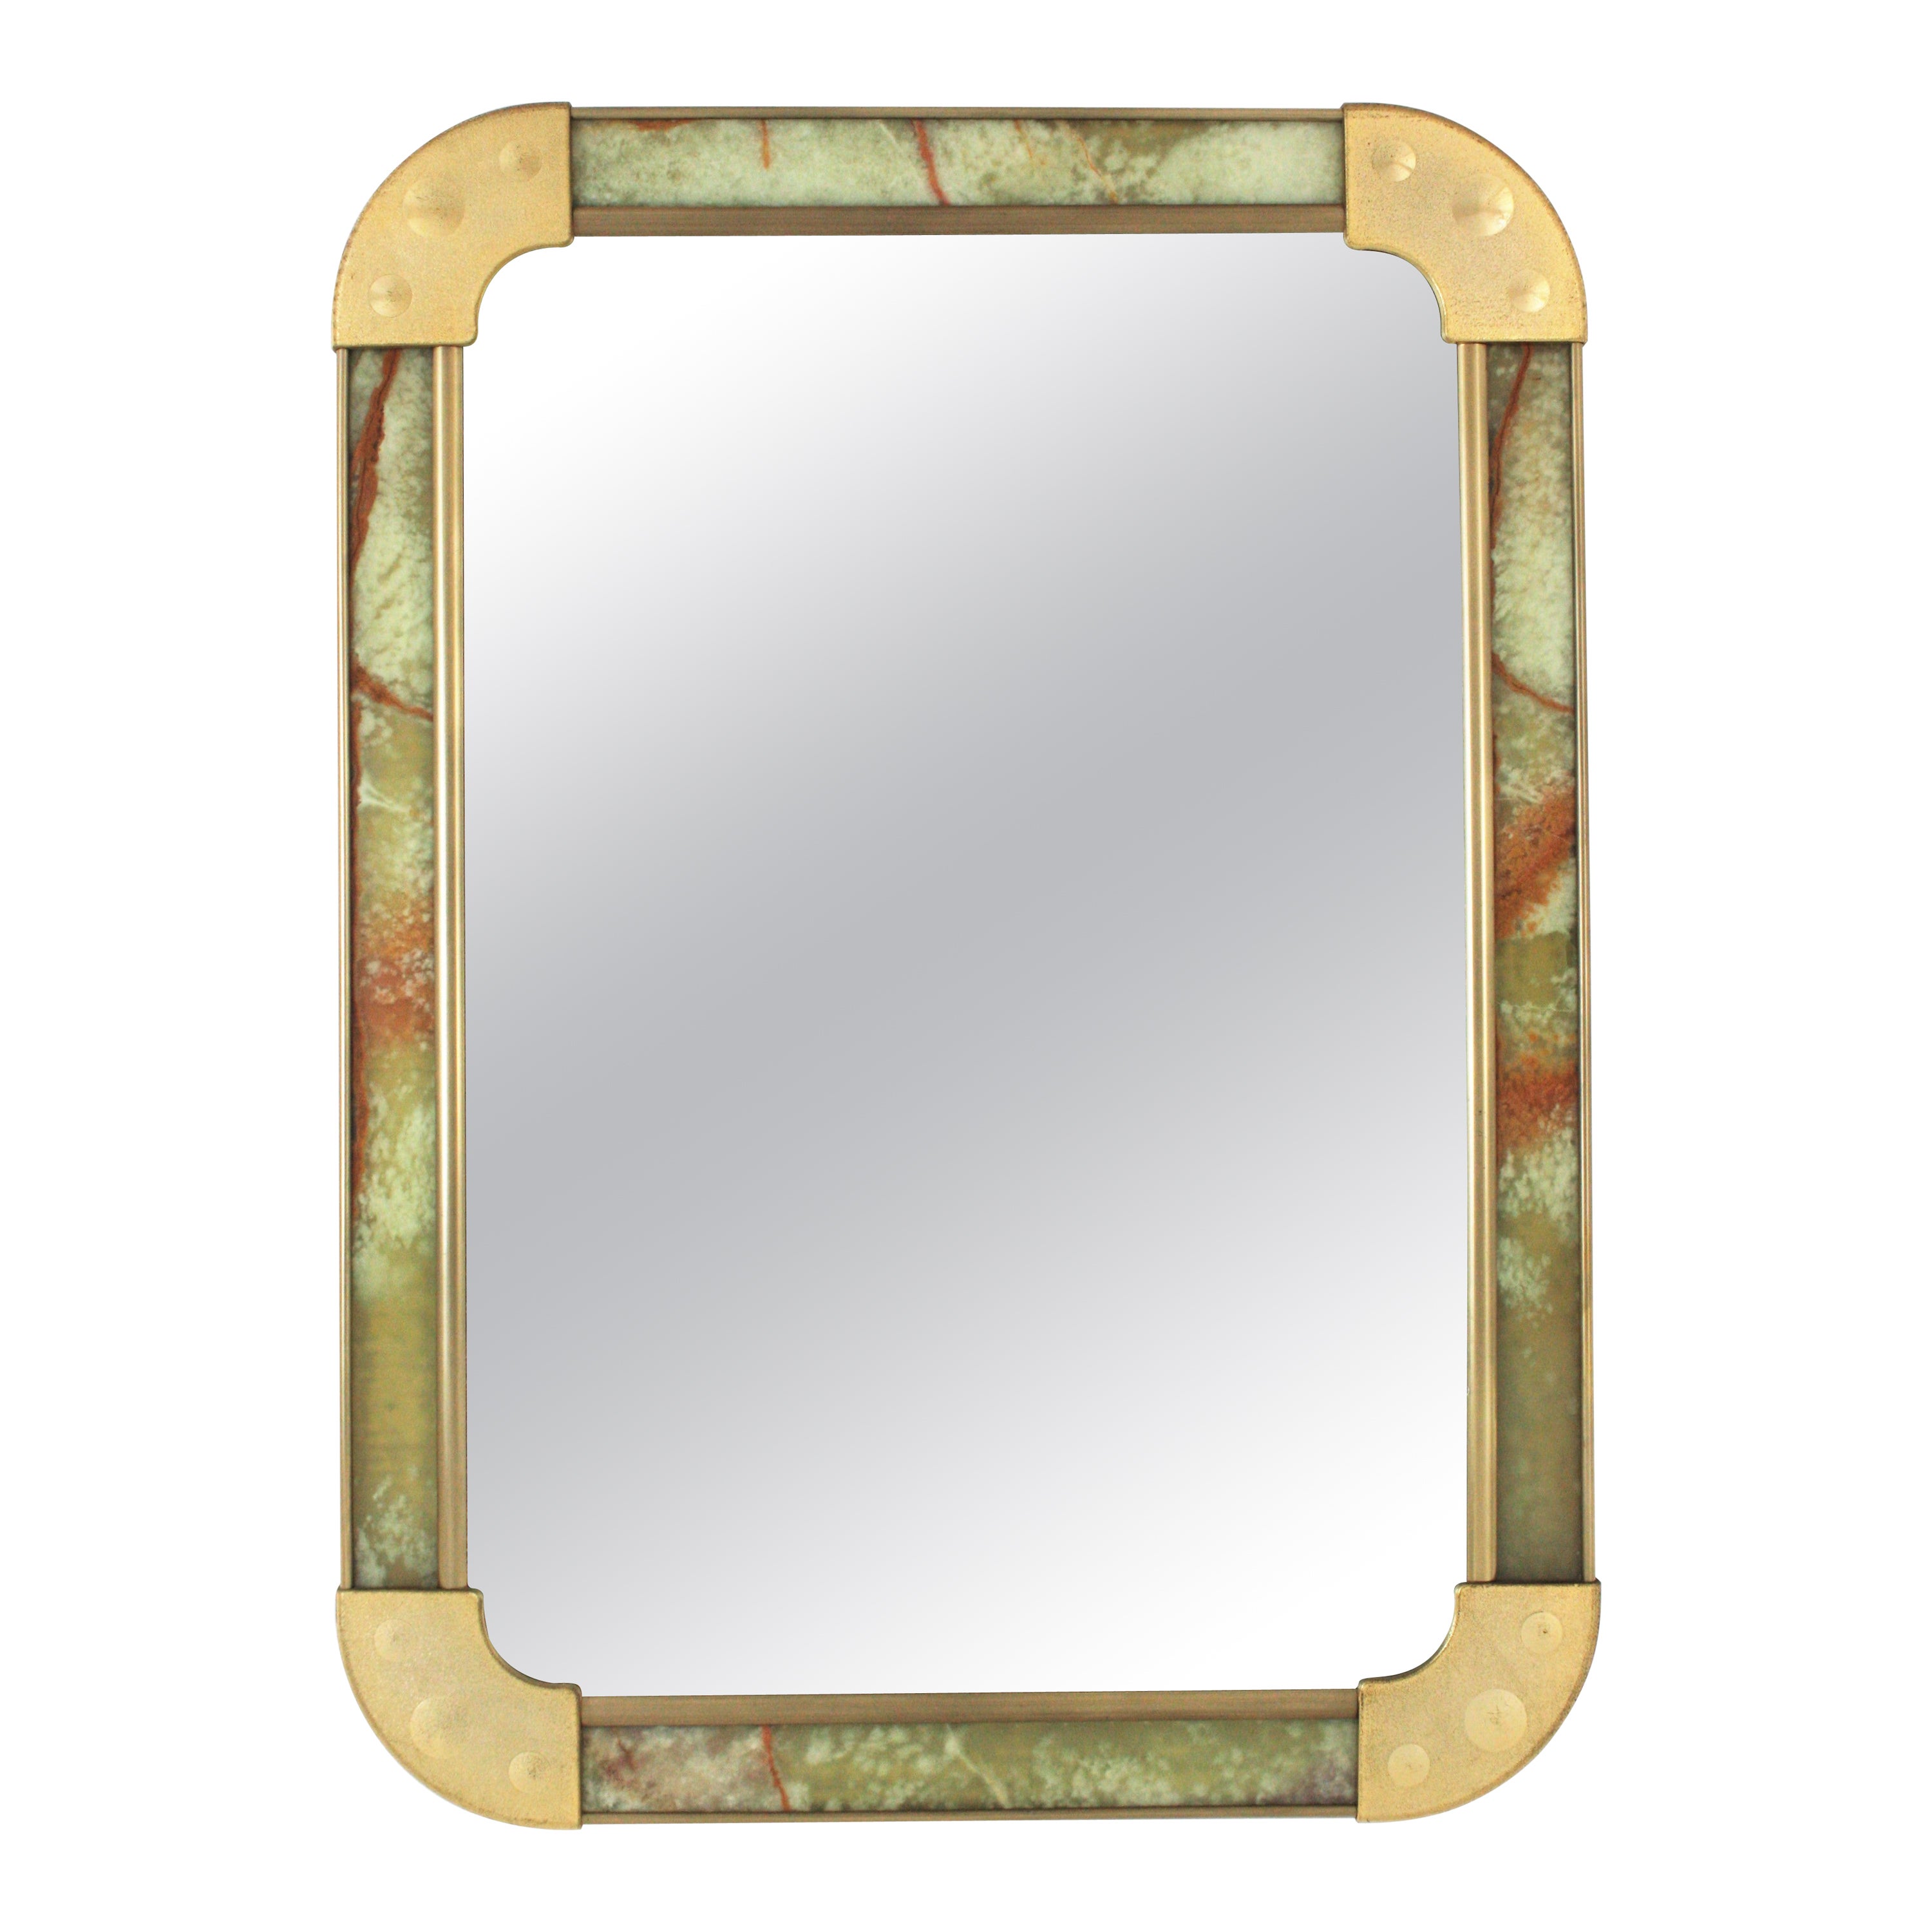 Spanish Midcentury Rectangular Mirror in Onyx and Brass For Sale